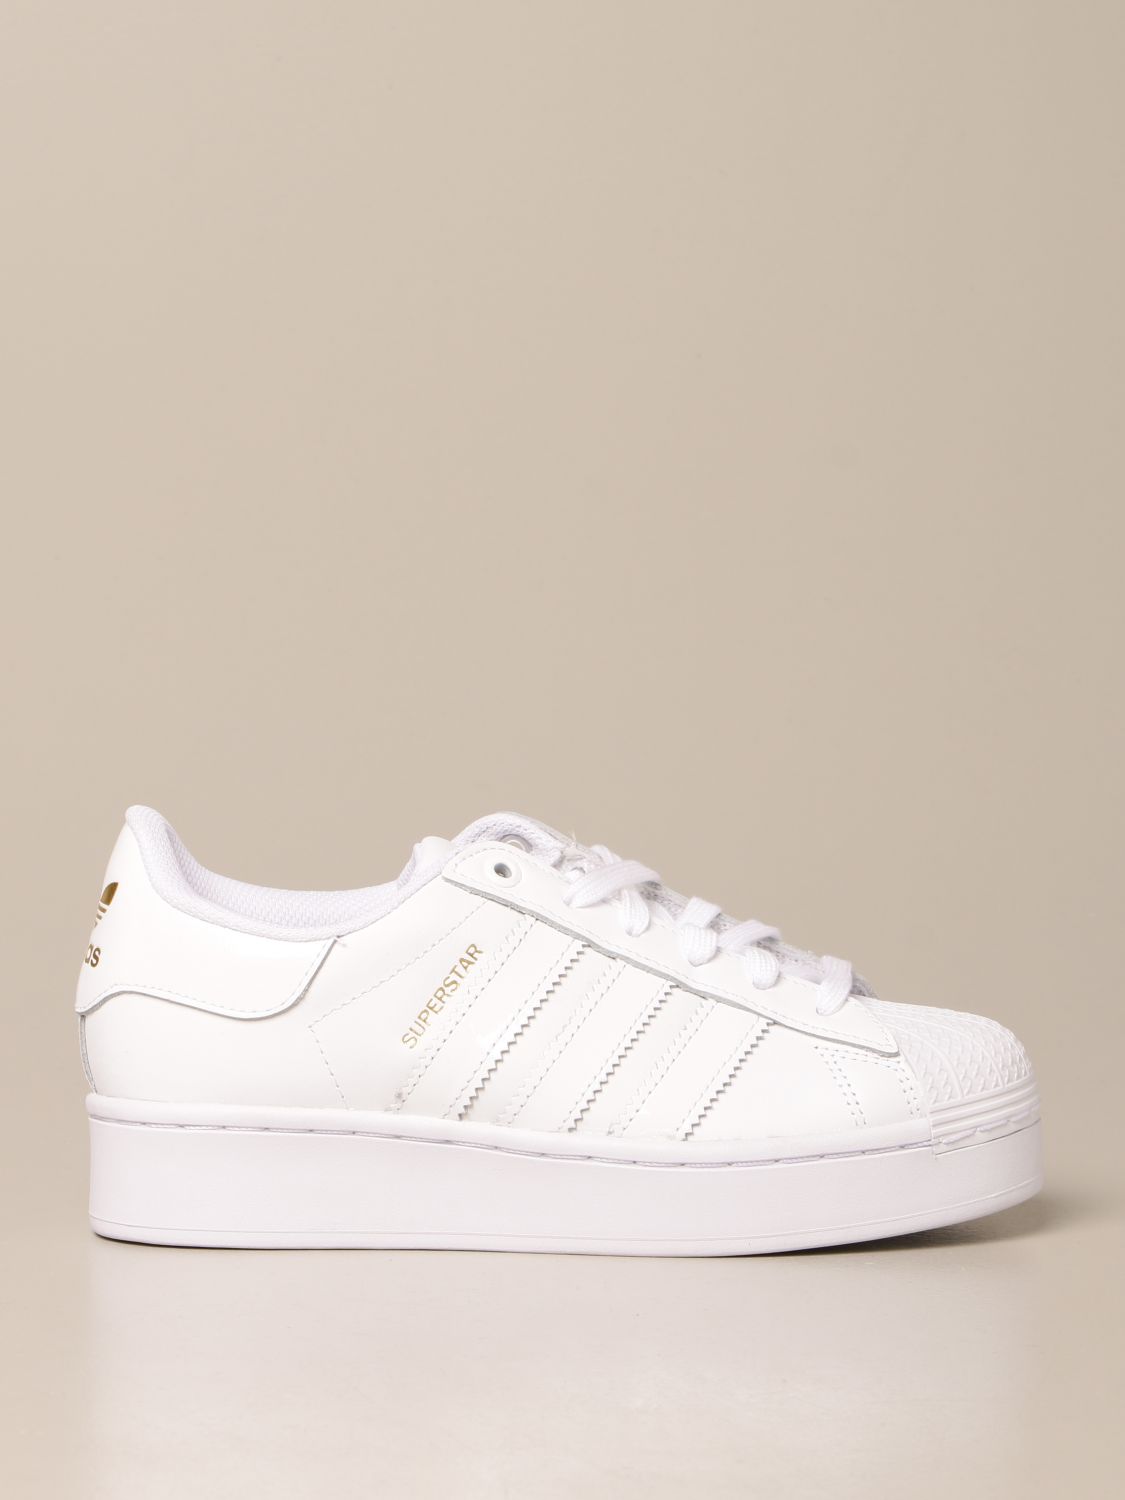 ADIDAS ORIGINALS: Superstar Bold sneakers in leather | Sneakers ...